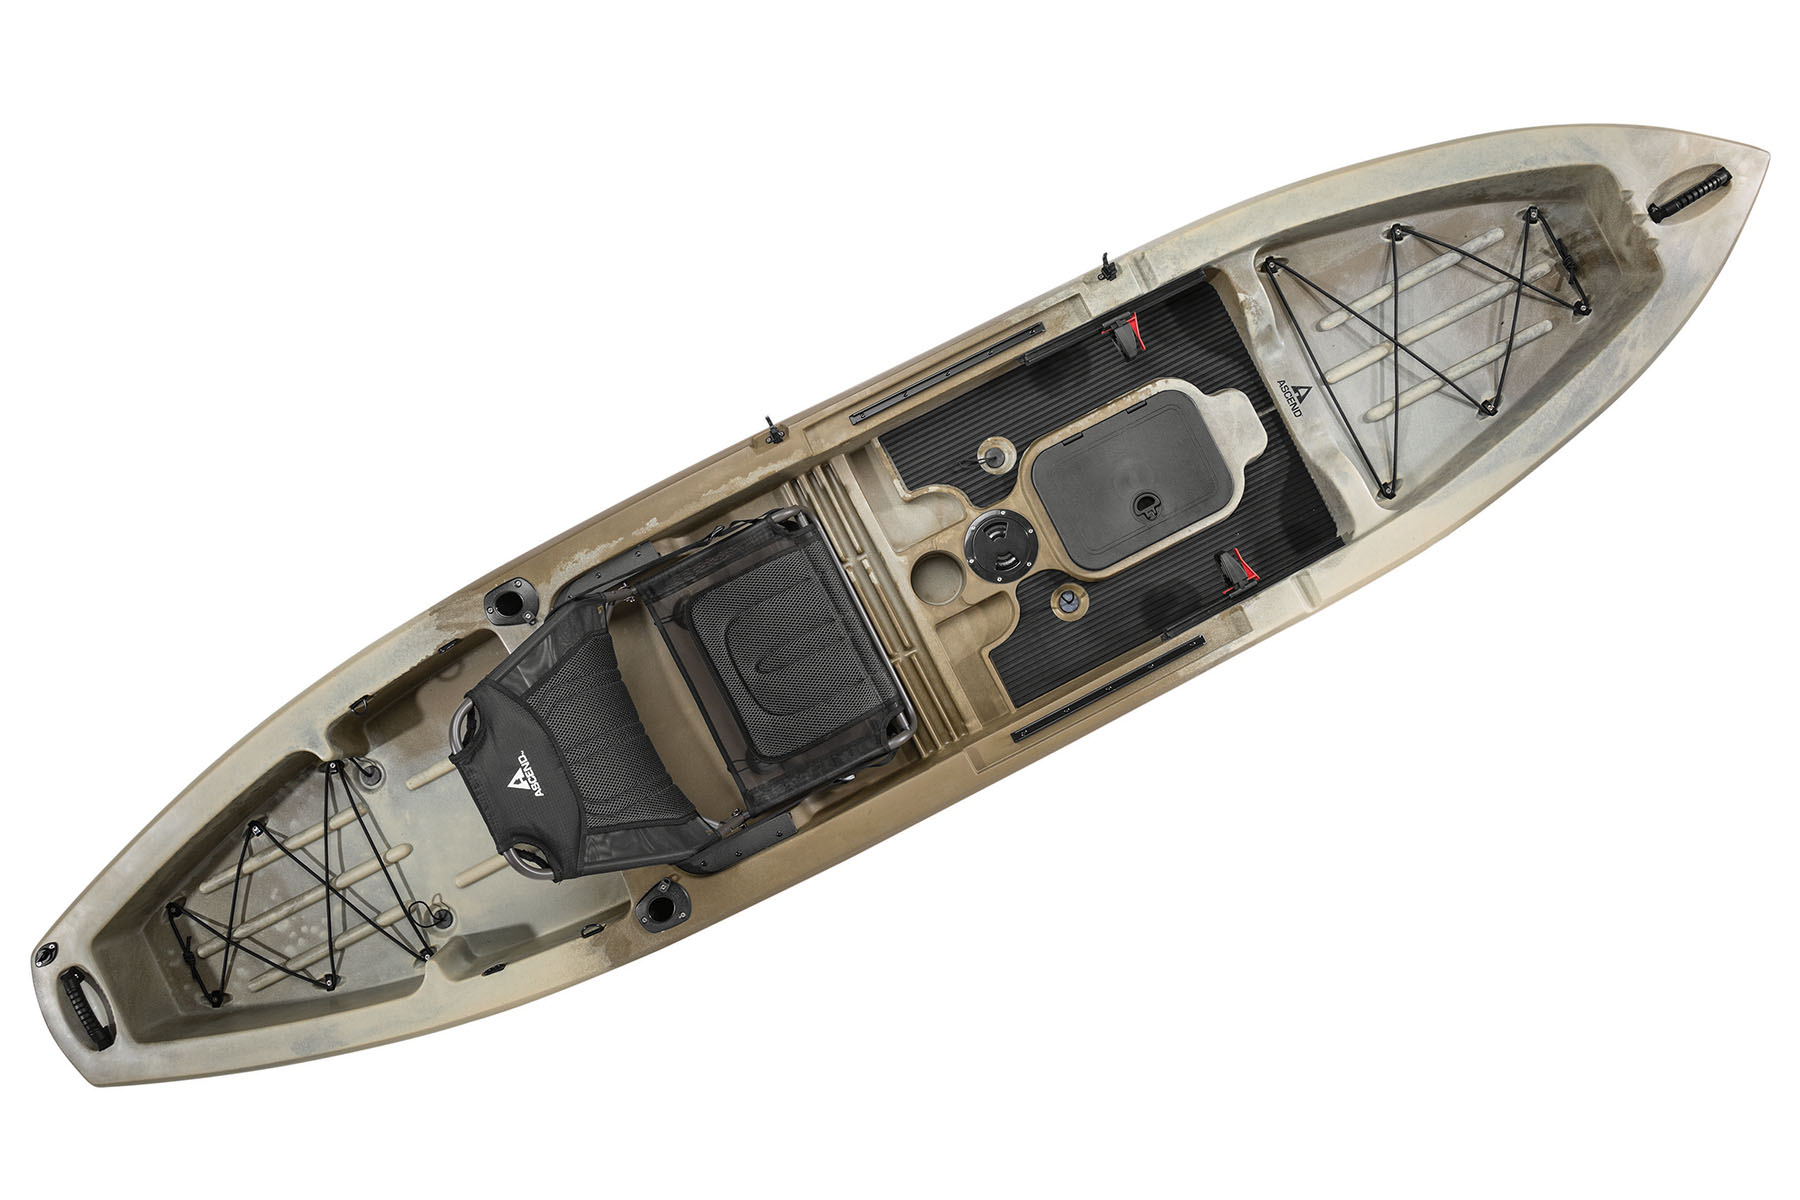 EXCLUSIVE FIRST LOOK NEW Ascend 133X Tournament Kayak 